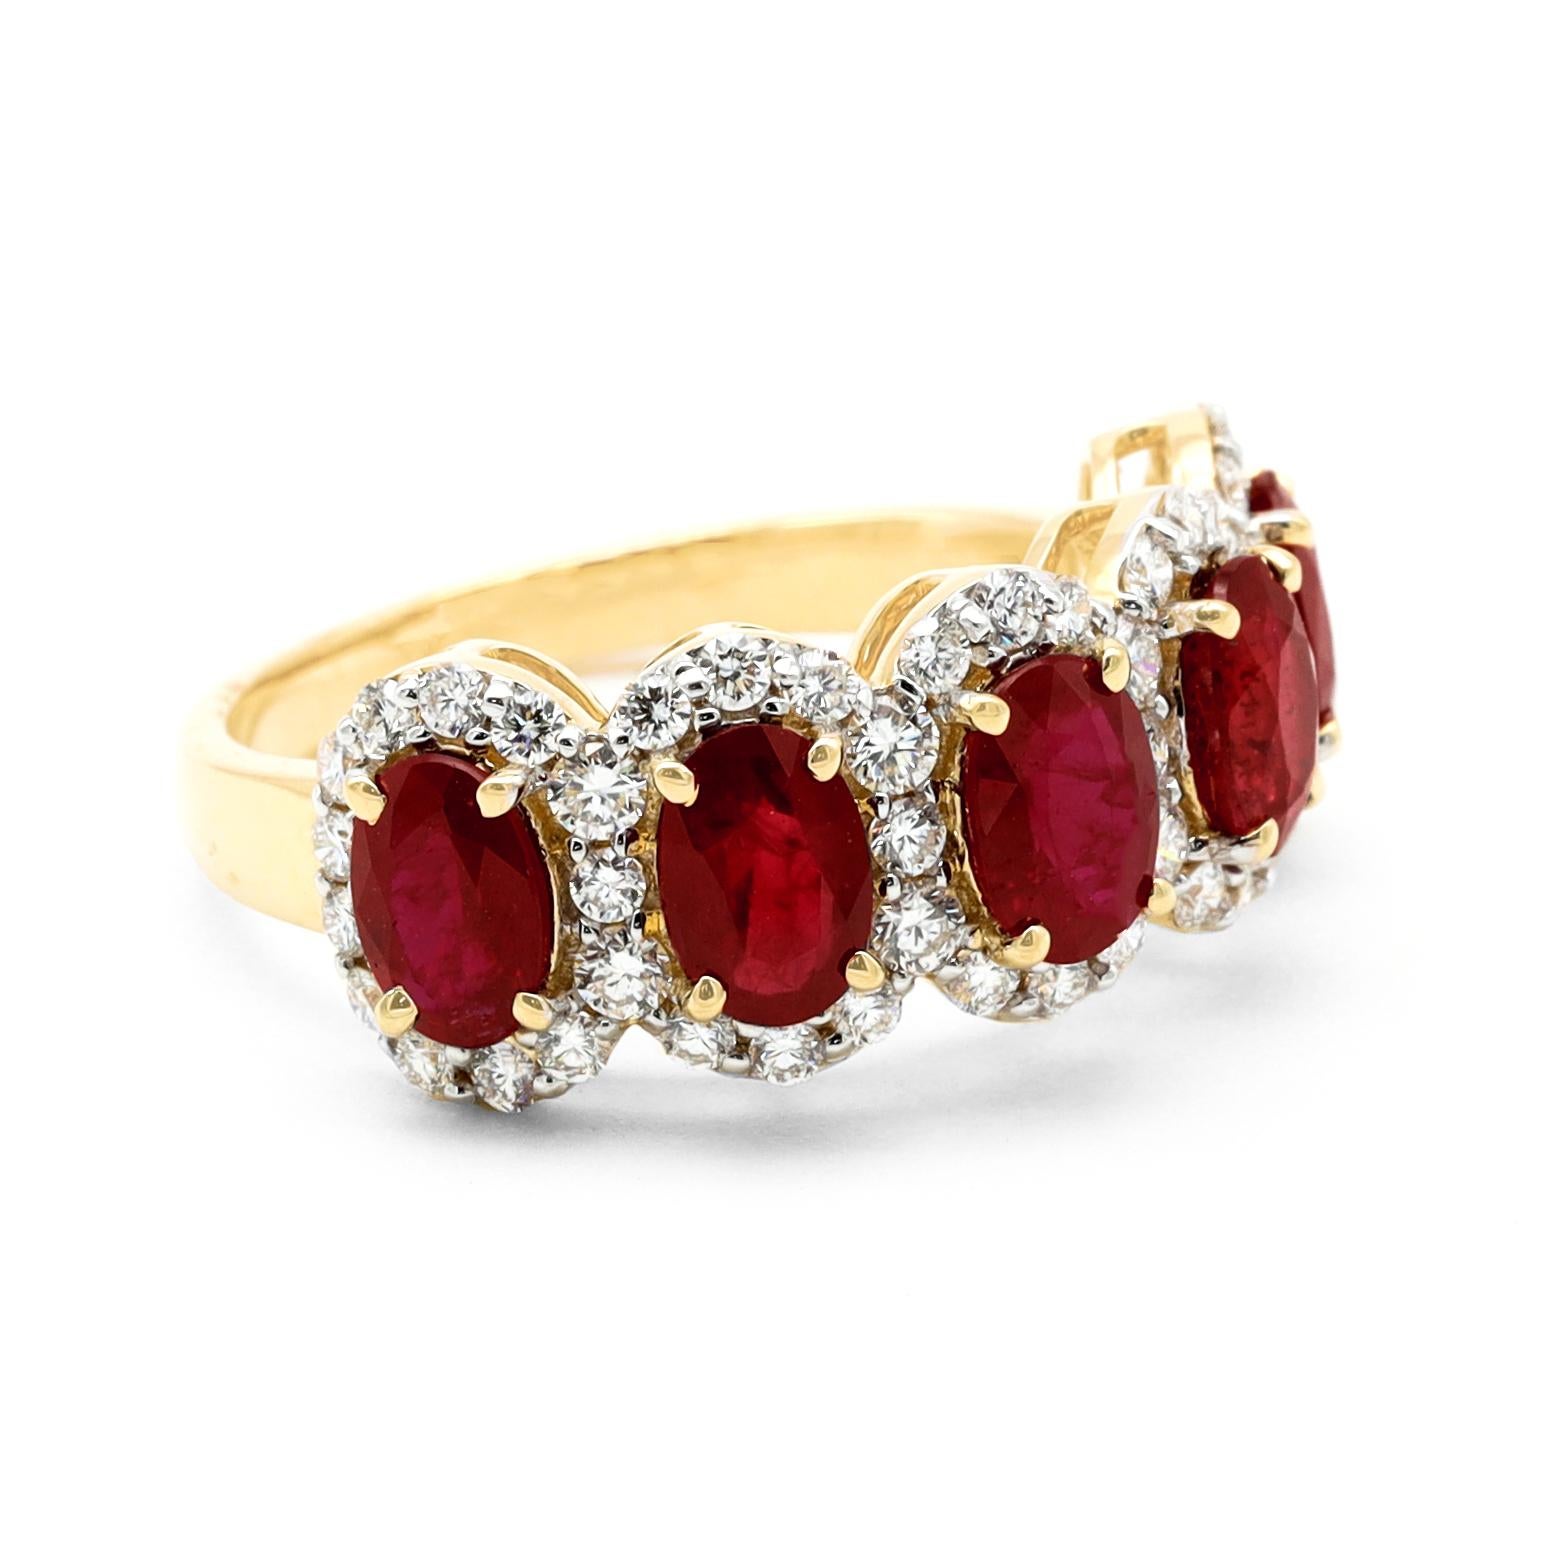 18 Karat Rose Gold 2.75 Carat Ruby and Diamond Cluster Eternity Half-Band Ring

This lively carmine red ruby half cluster diamond band is charismatic. The blood-red 5-matching ruby oval solitaires are closely grain prong set with the merged round